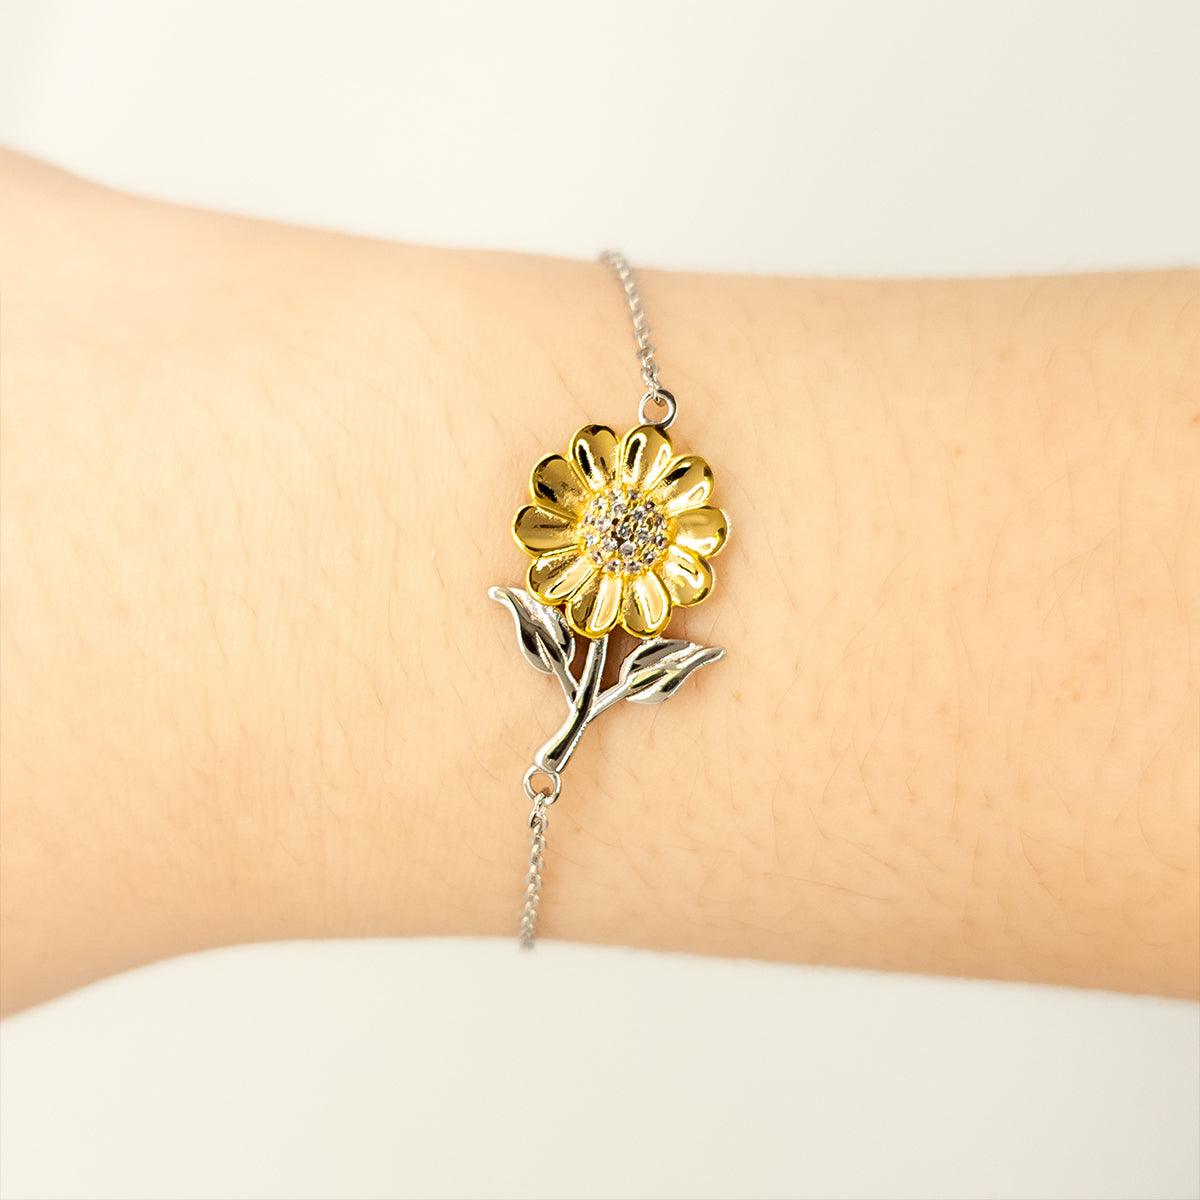 Sarcastic Payroll Clerk Sunflower Bracelet Gifts, Christmas Holiday Gifts for Payroll Clerk Birthday Message Card, Payroll Clerk: Because greatness is woven into the fabric of every day, Coworkers, Friends - Mallard Moon Gift Shop